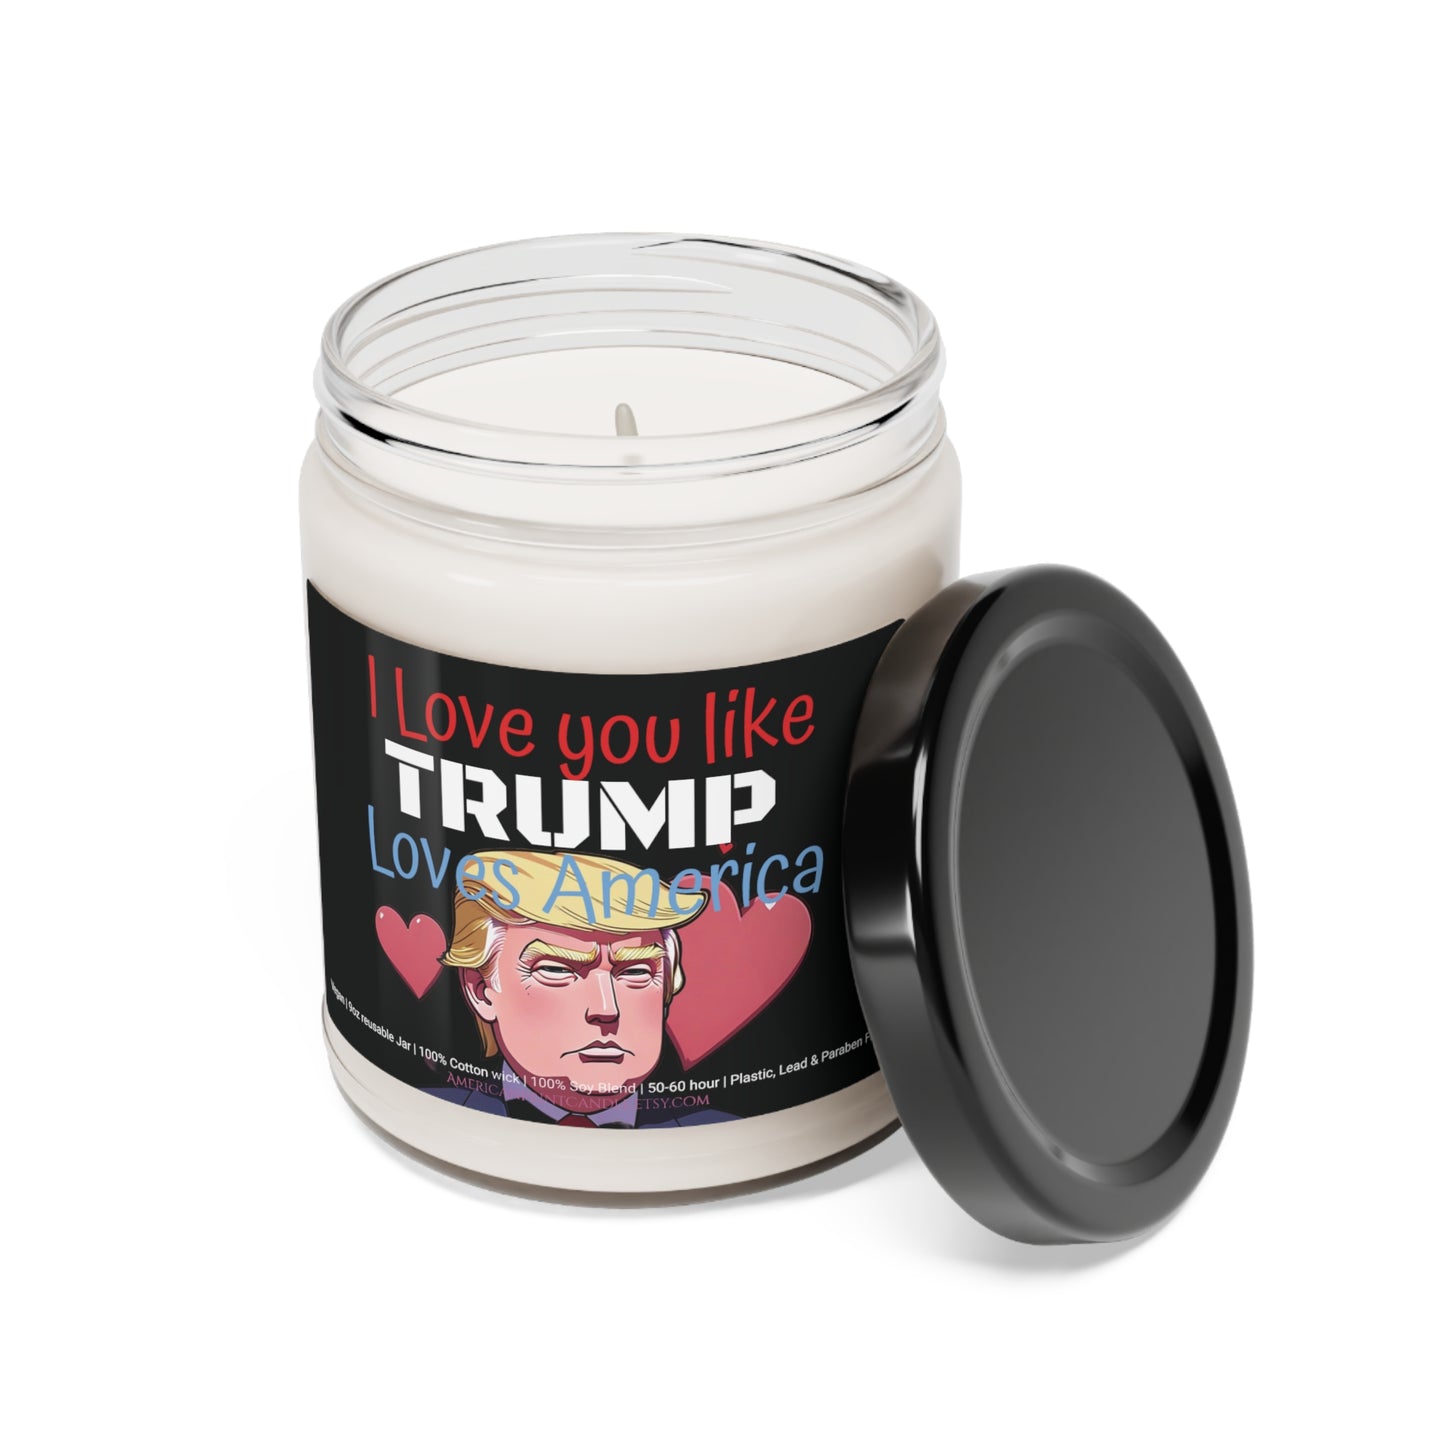 I love you like Trump loves America Valentine's Day Gift Scented Soy Candle 9oz Cartoon